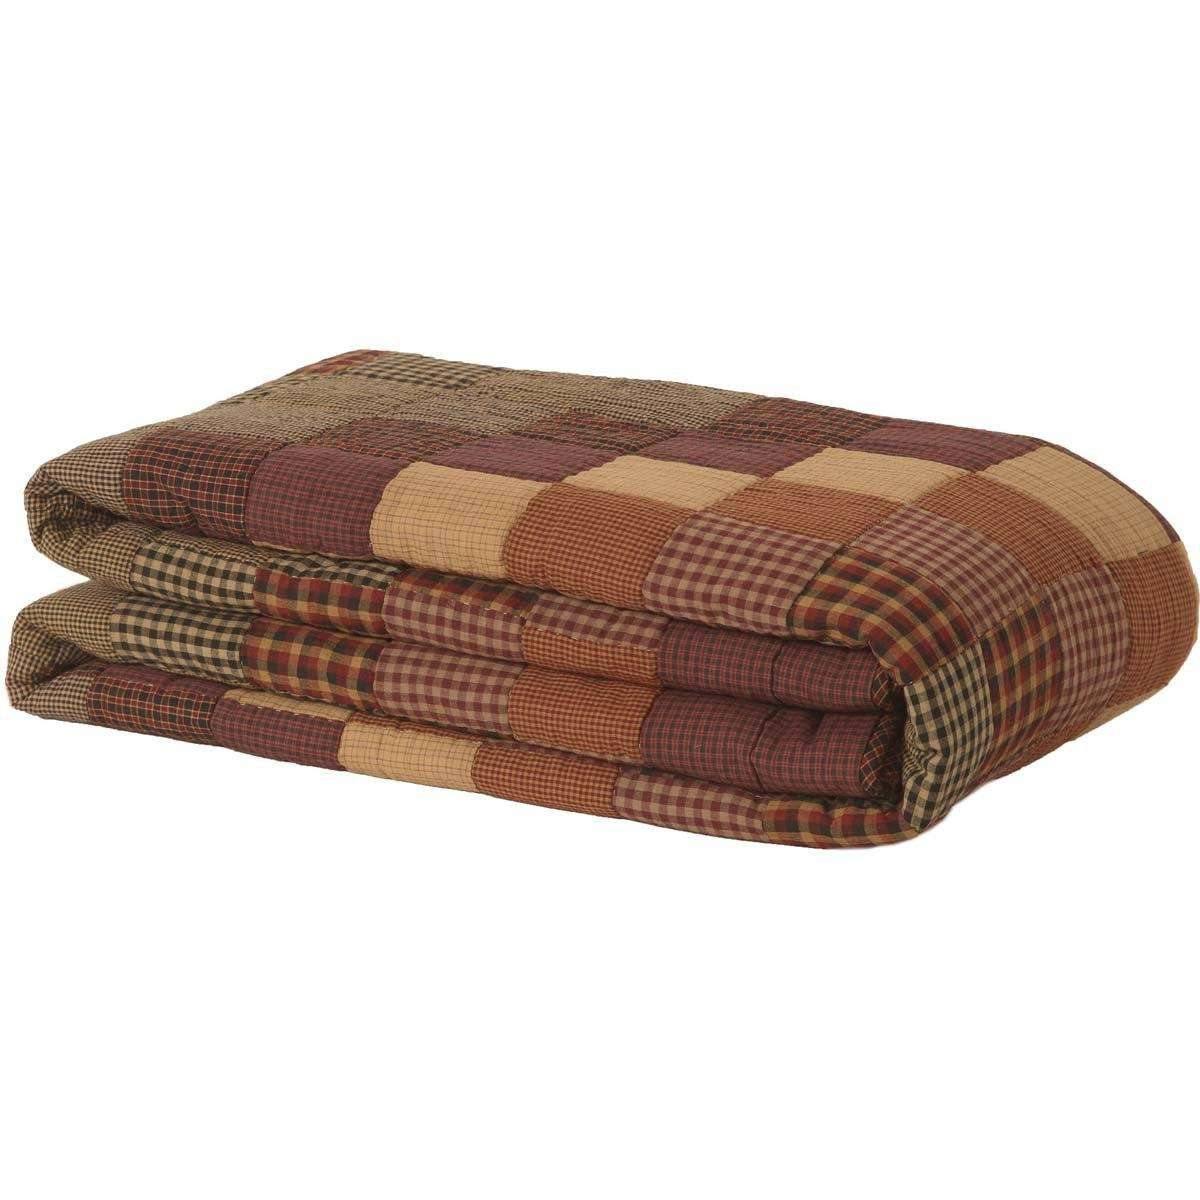 Heritage Farms California King Quilt 130Wx115L VHC Brands folded